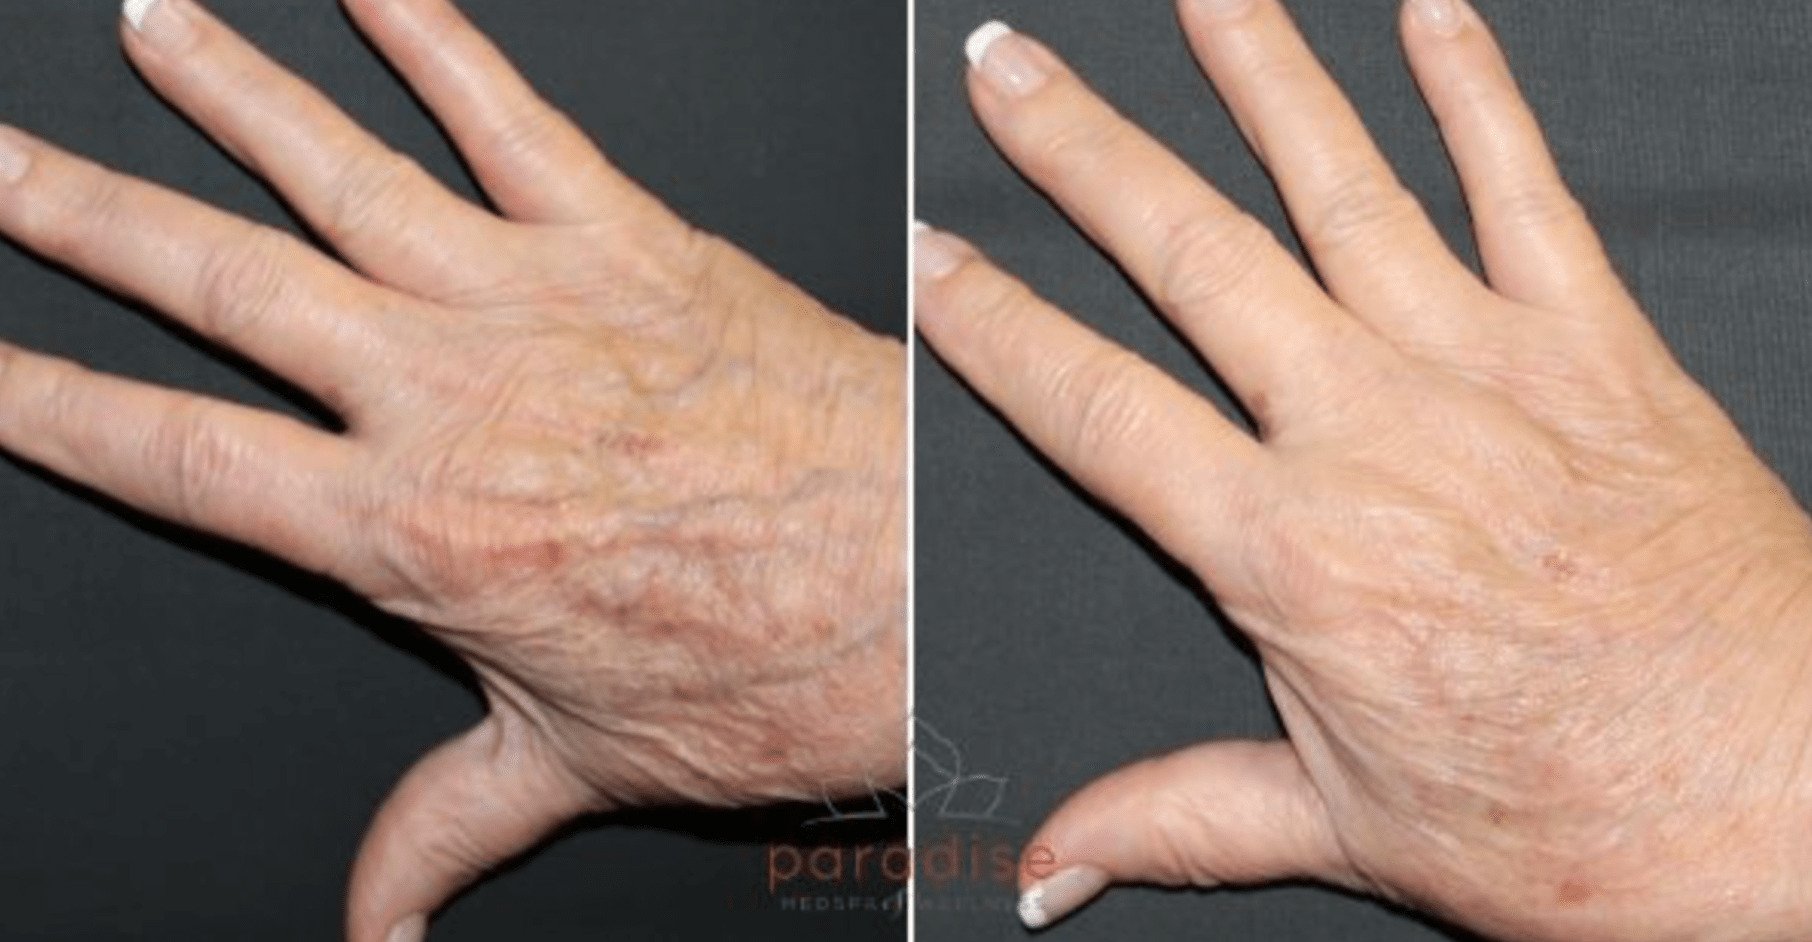 Patient's hands before and after hand fat grafting